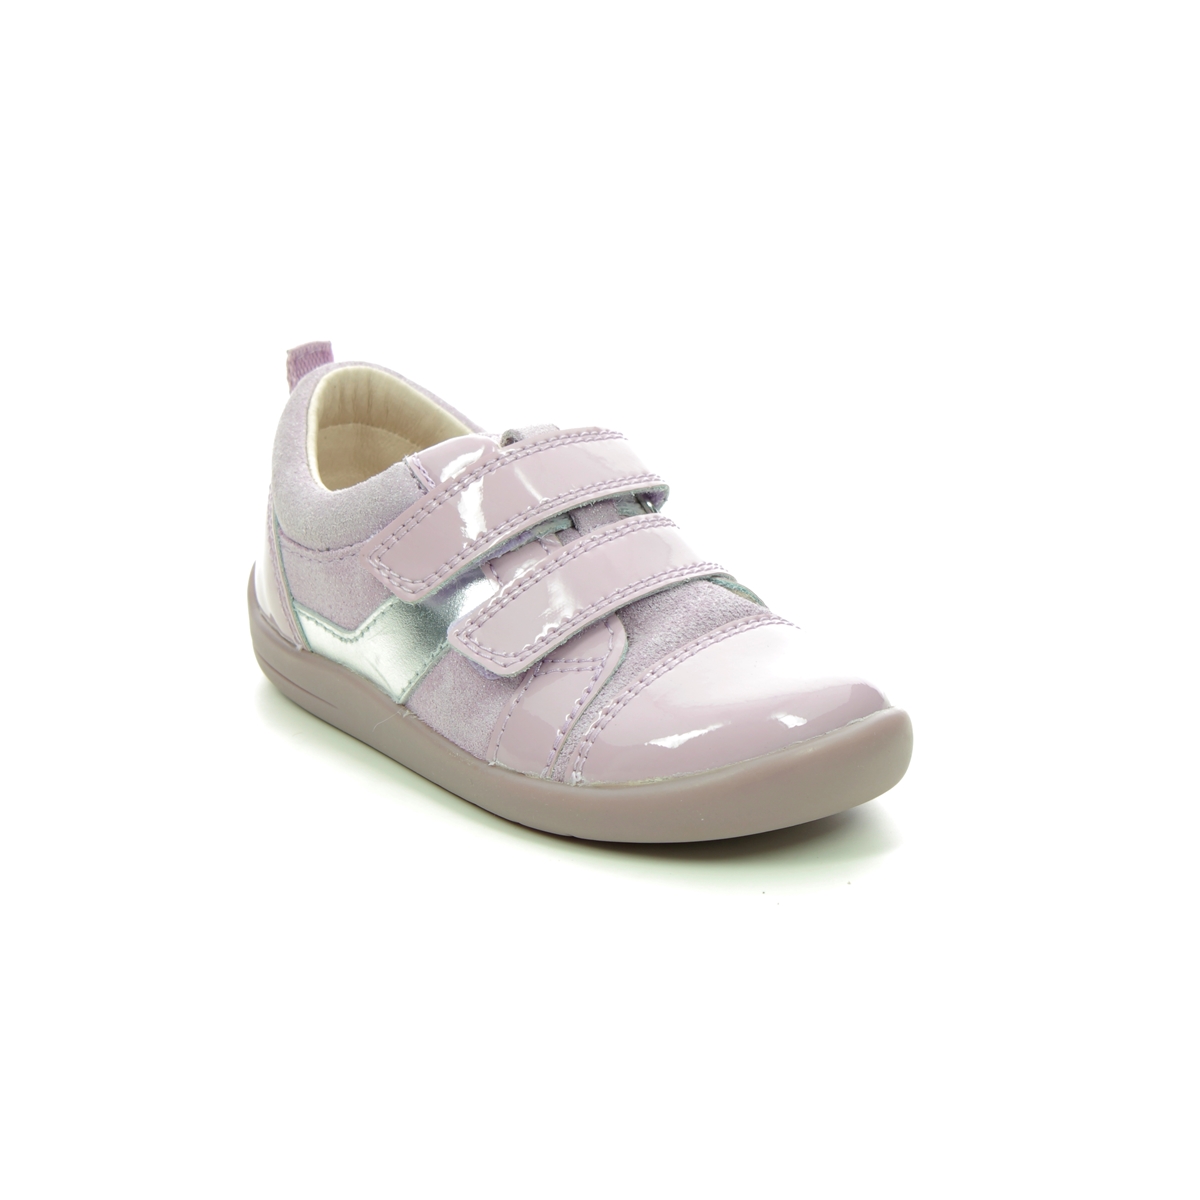 Start Rite Maze Lilac Kids first shoes 0818-86F in a Plain Leather in Size 7